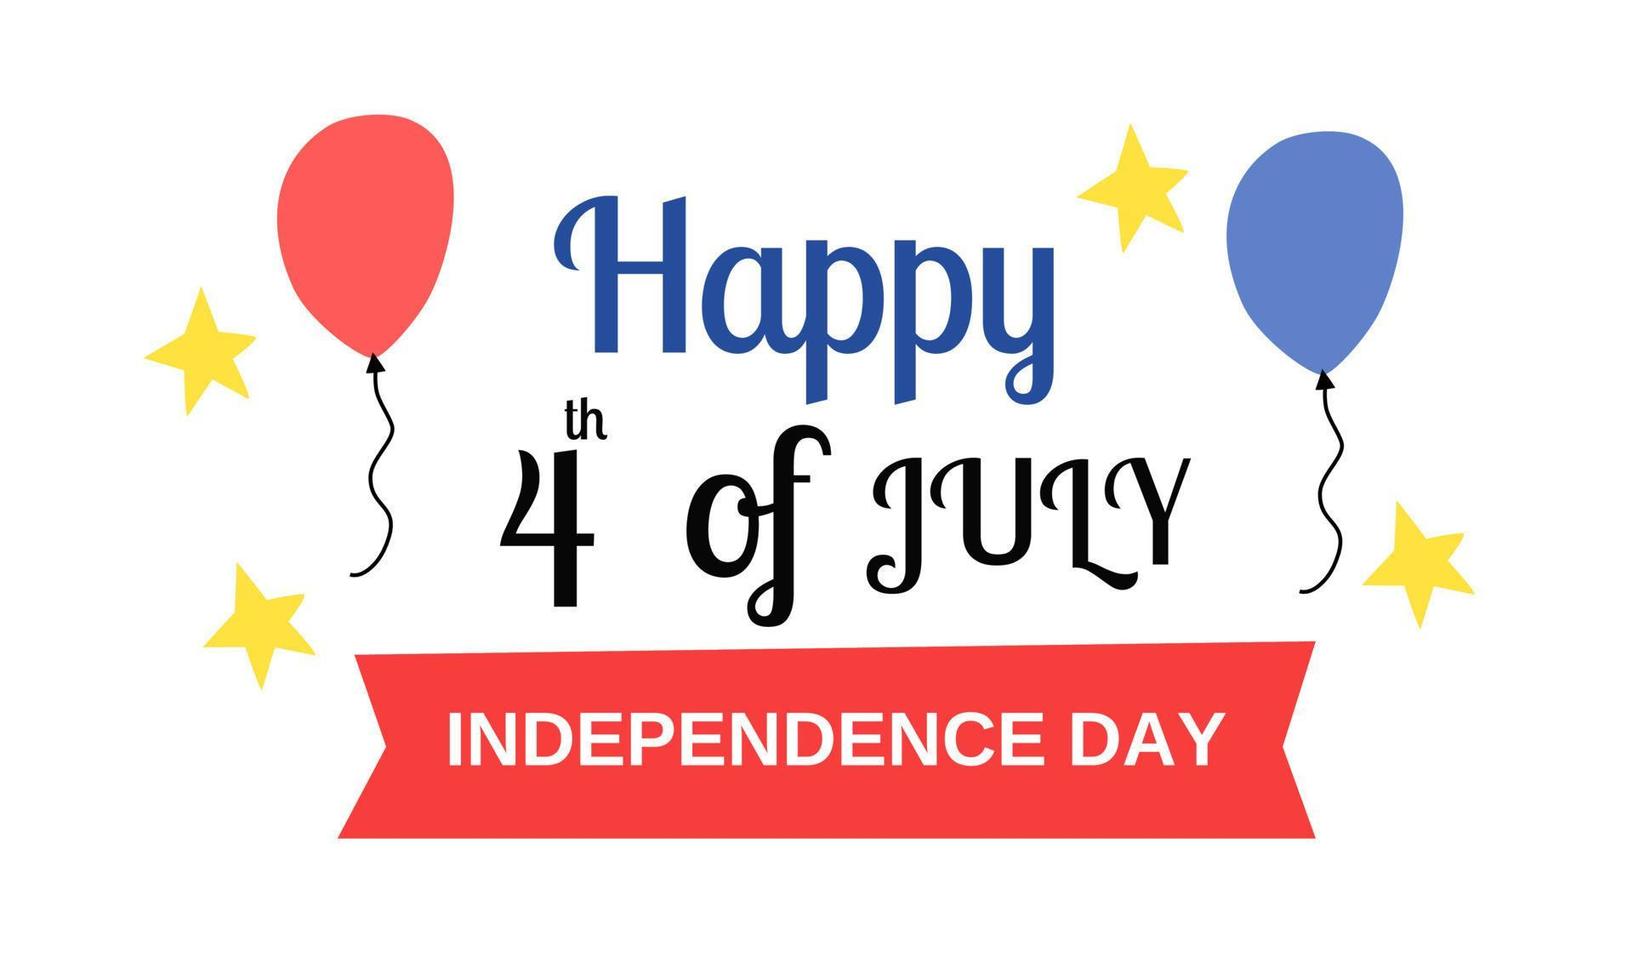 Independence Day background vector